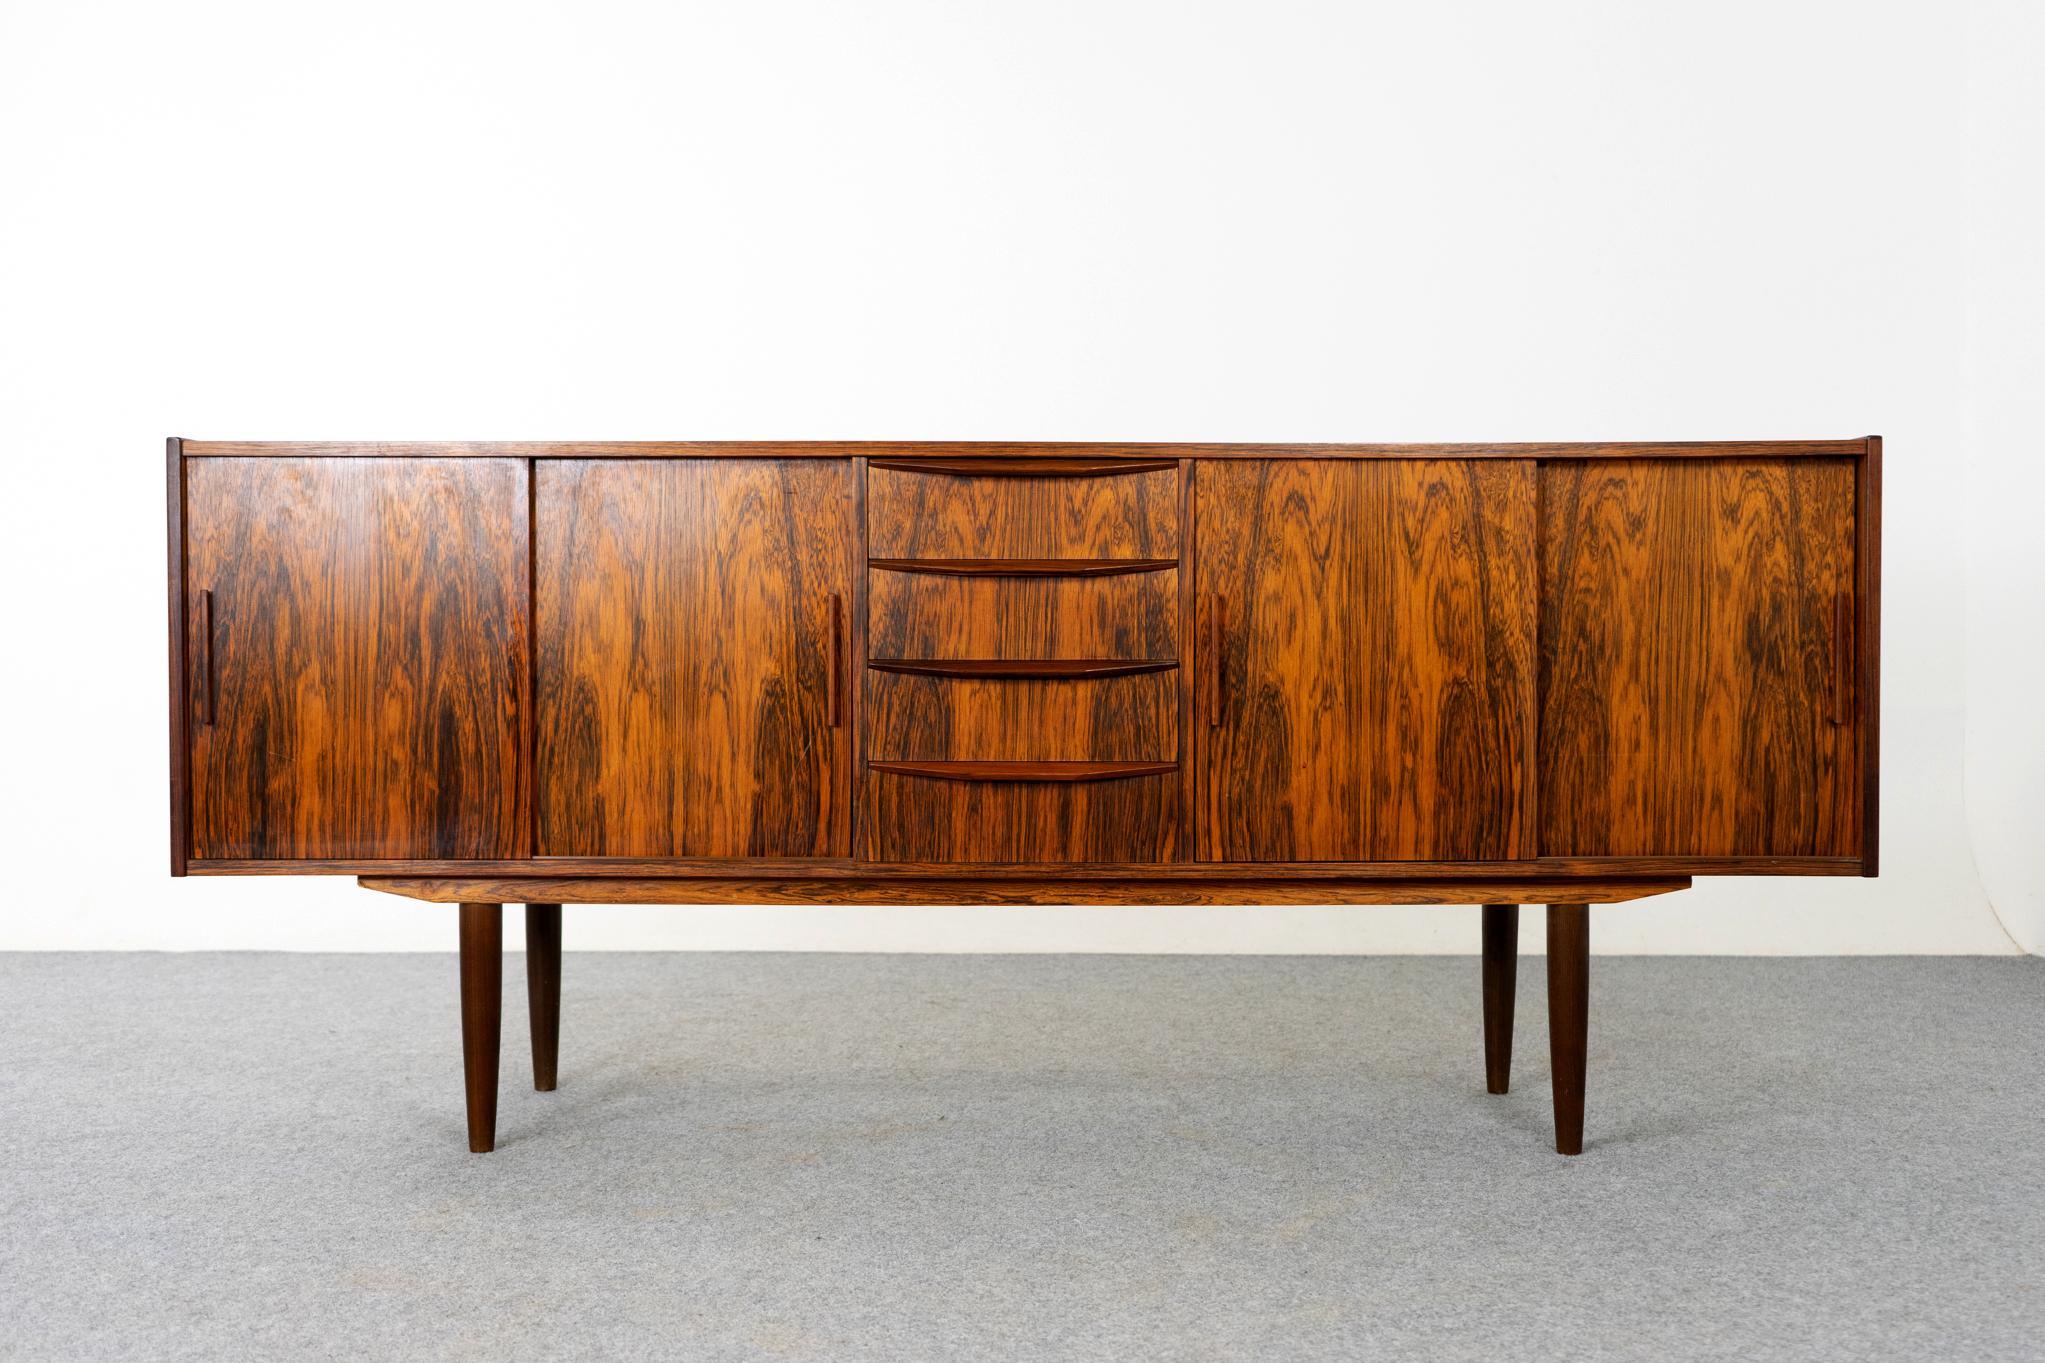 Rosewood Danish sideboard circa 1960's. Great proportions! Clean, simple lined design with exceptional book-matched veneer throughout. Sliding doors and exterior drawers offers ample storage for a variety of different uses. Main body of the cabinet